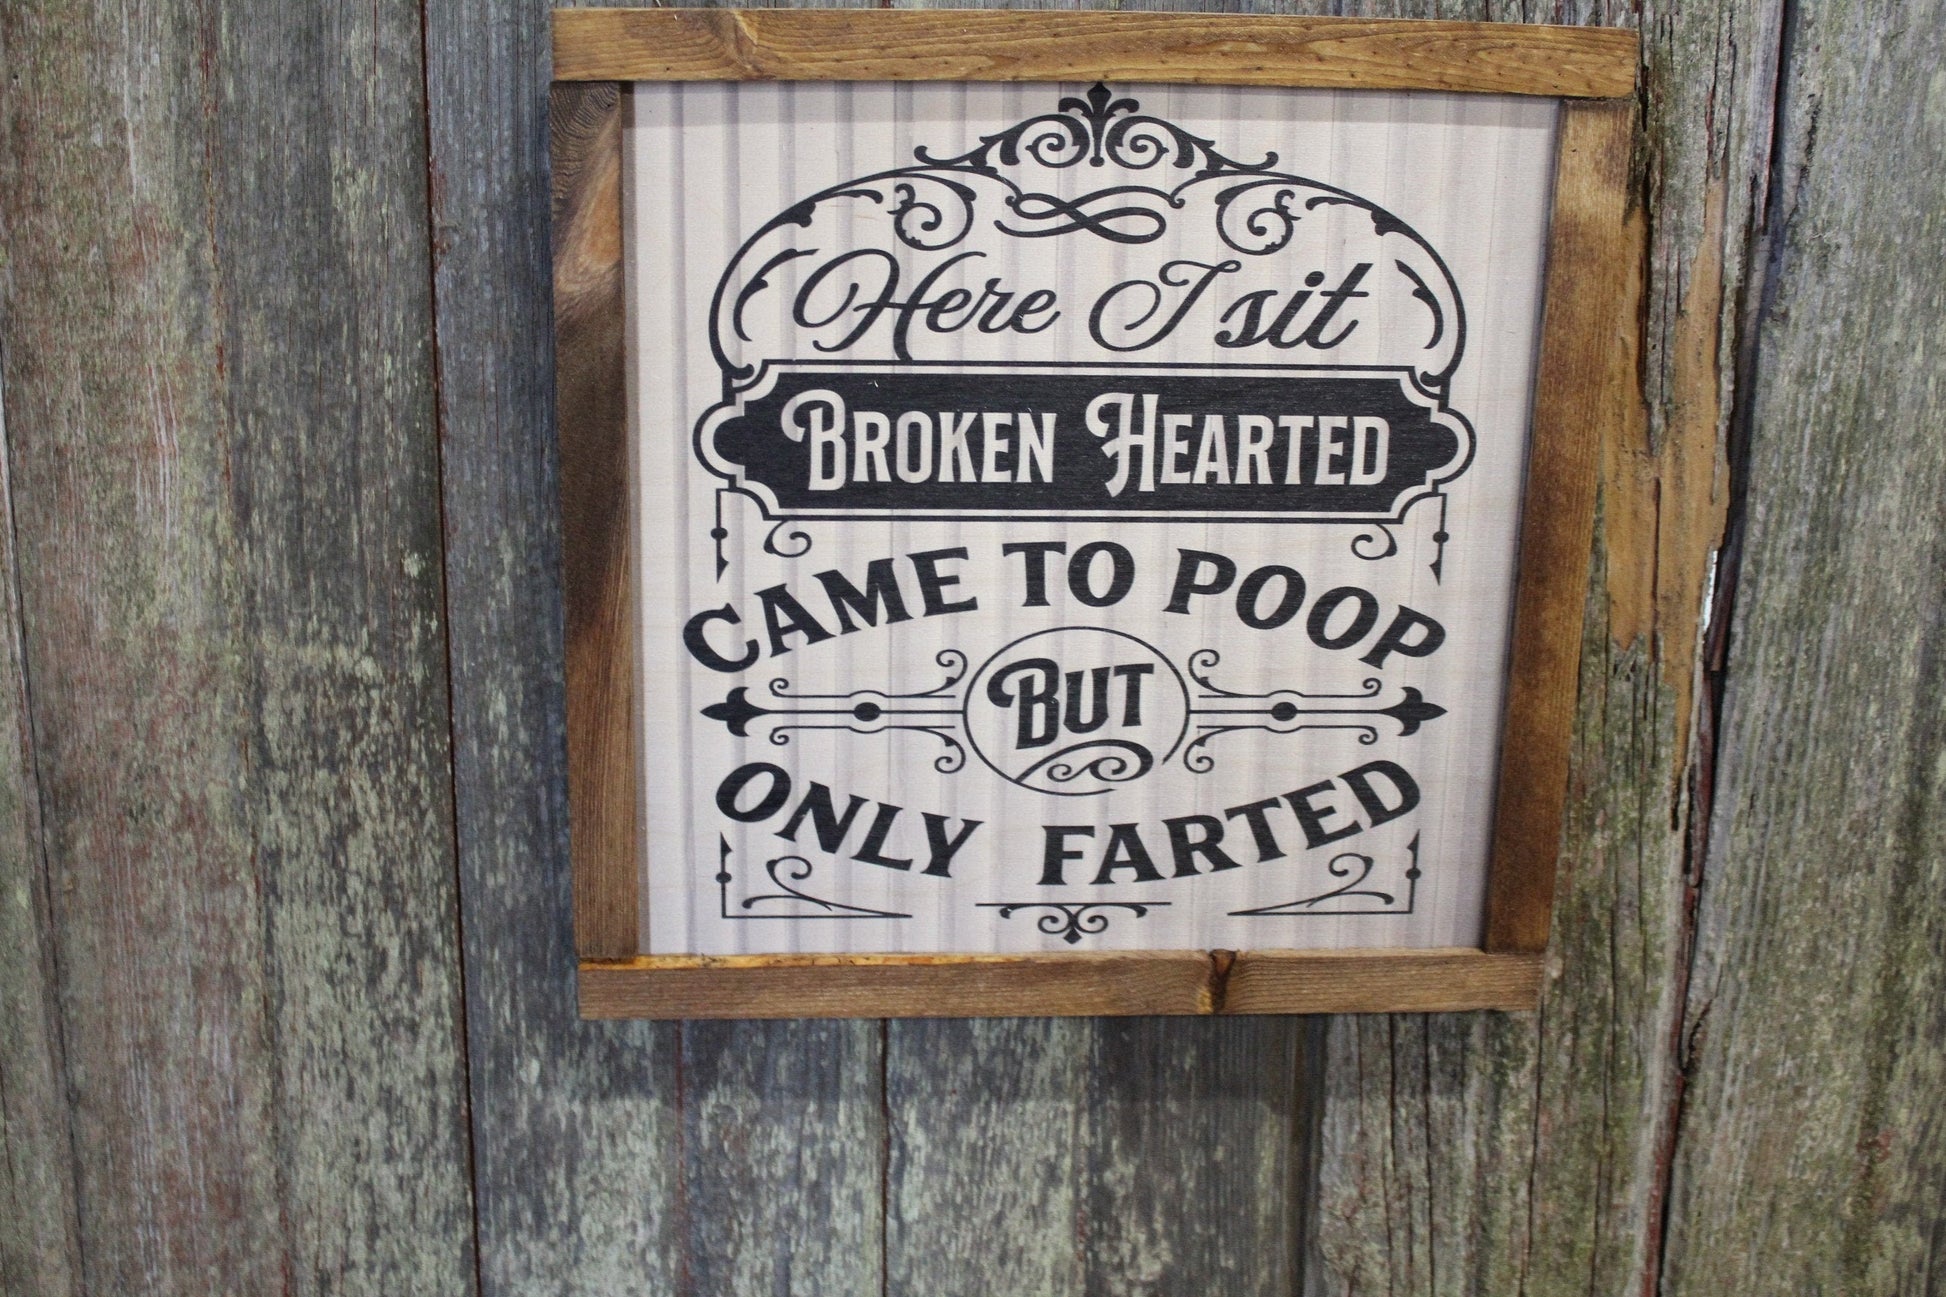 Here I Sit Broken Hearted Bathroom Wood Sign Only Farted Wall Art Decoration Wall Hanging Farmhouse Rustic Shiplap Funny Humor Retro Scroll